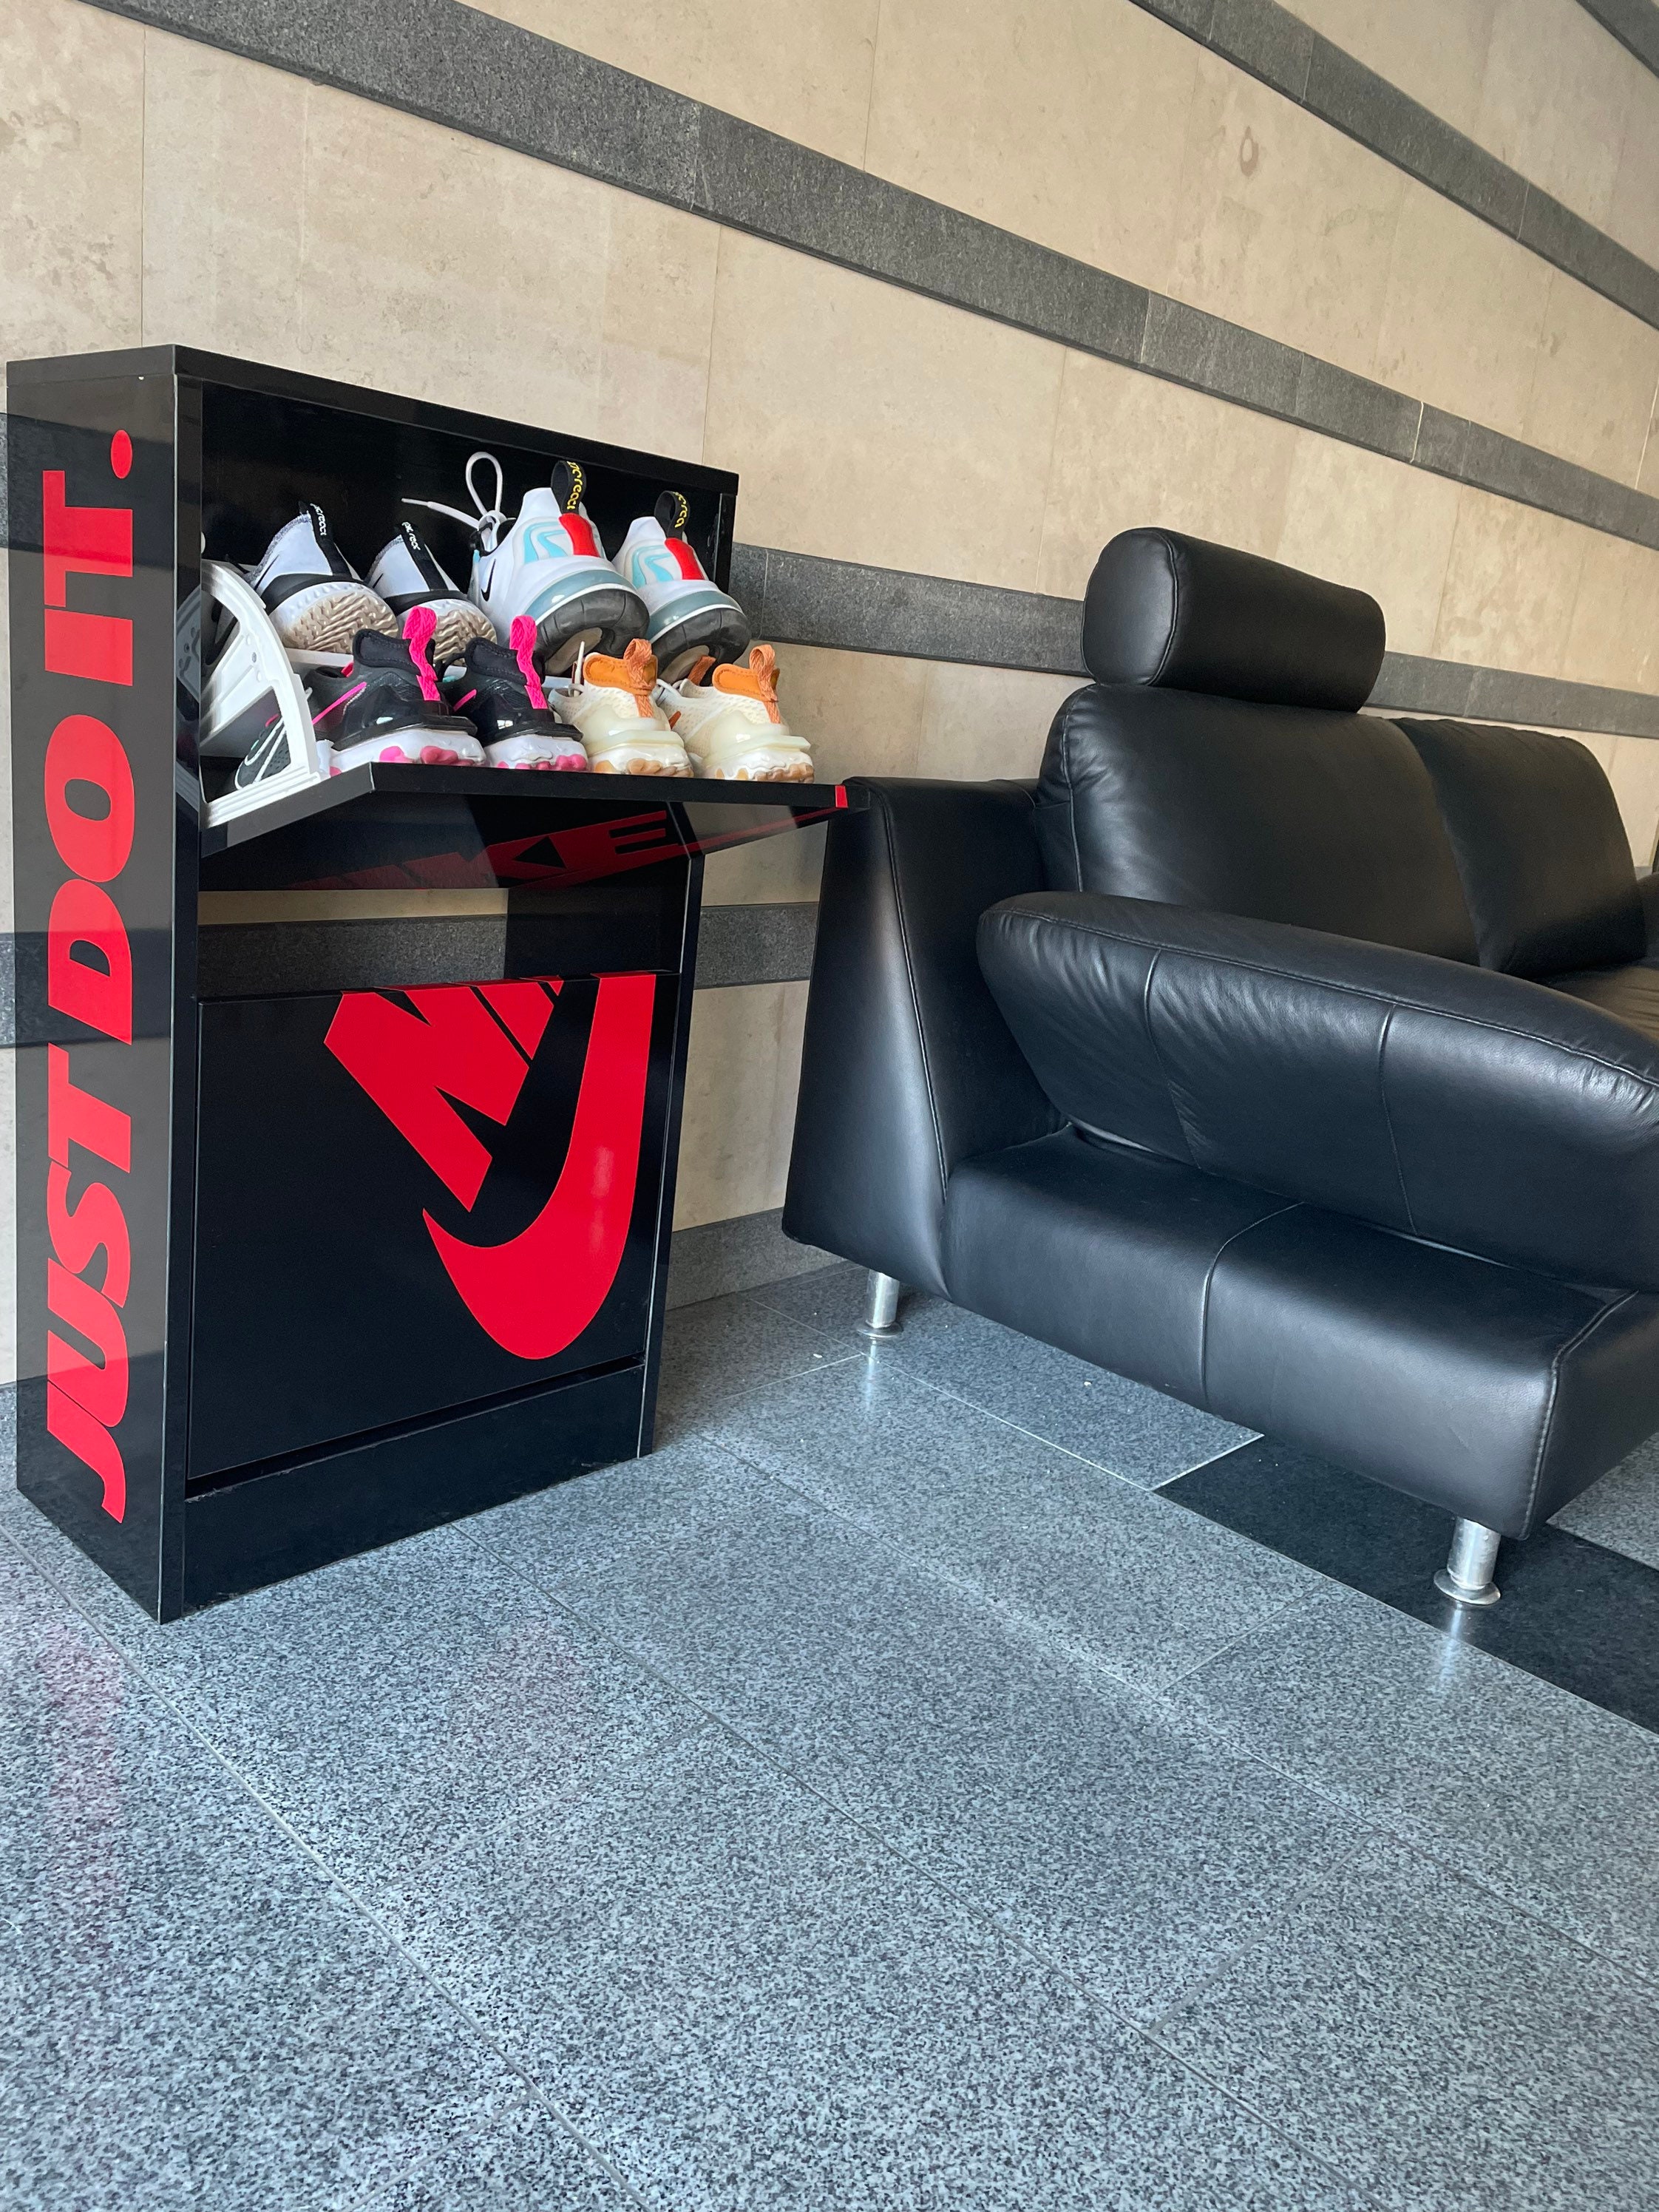 These Louboutin and Nike shoe storage boxes are the stuff of